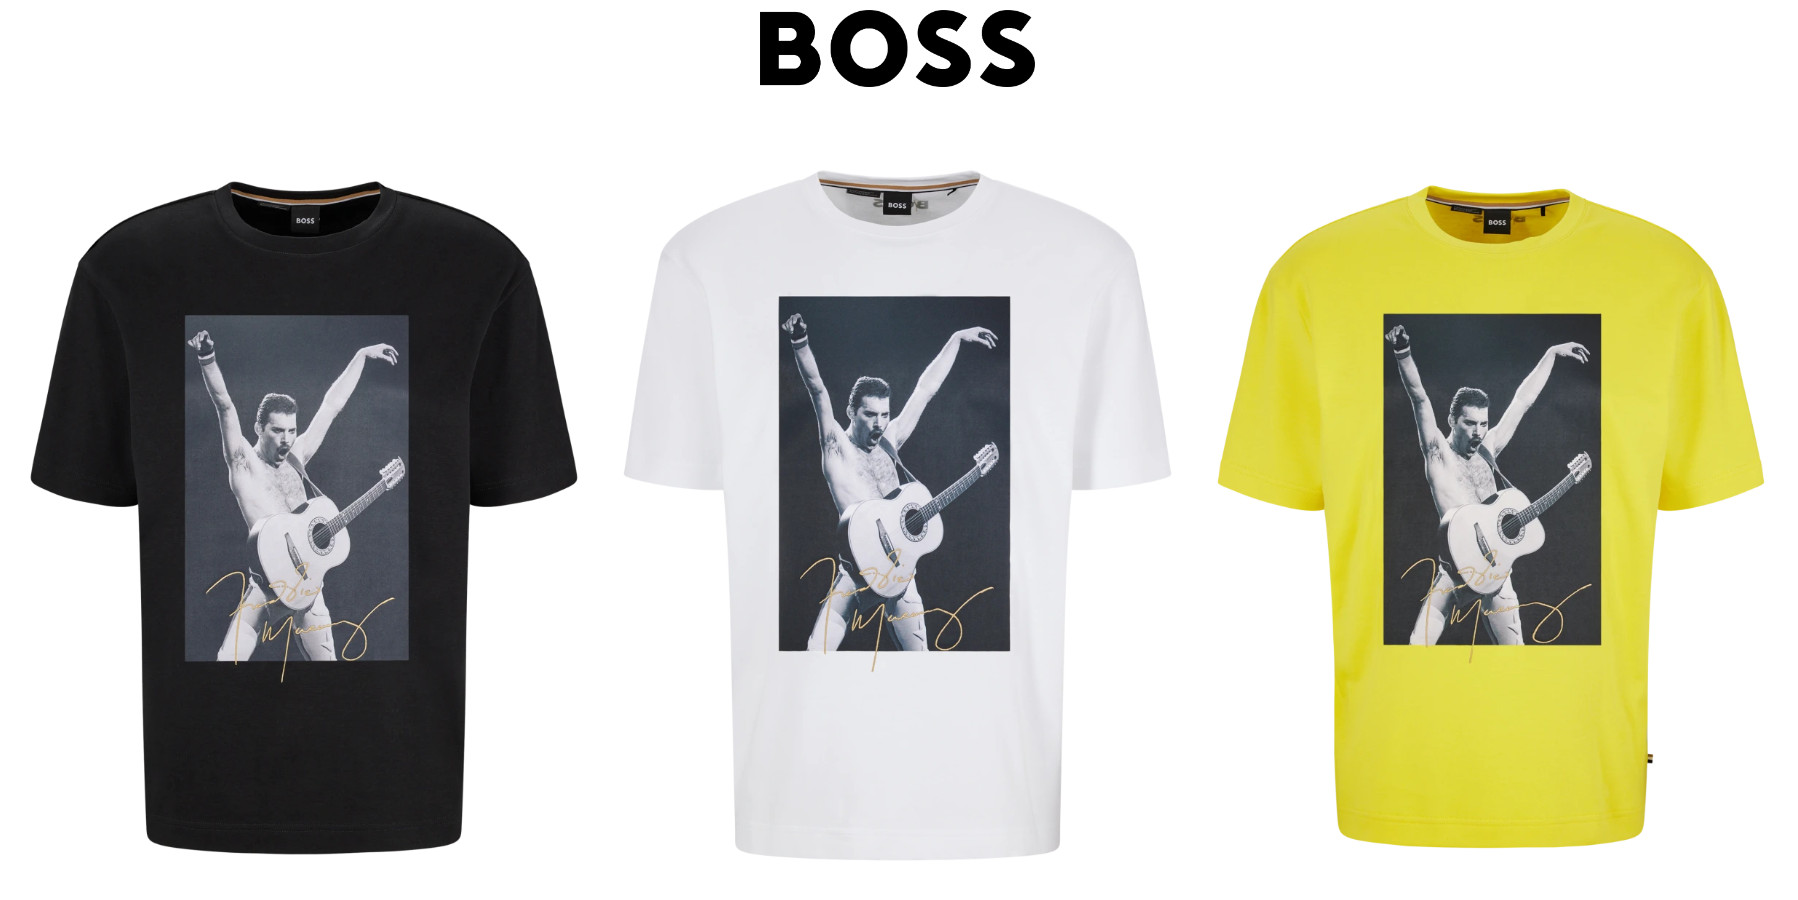 Unapologetically boss a new capsule collection inspired by the legendary freddie mercury